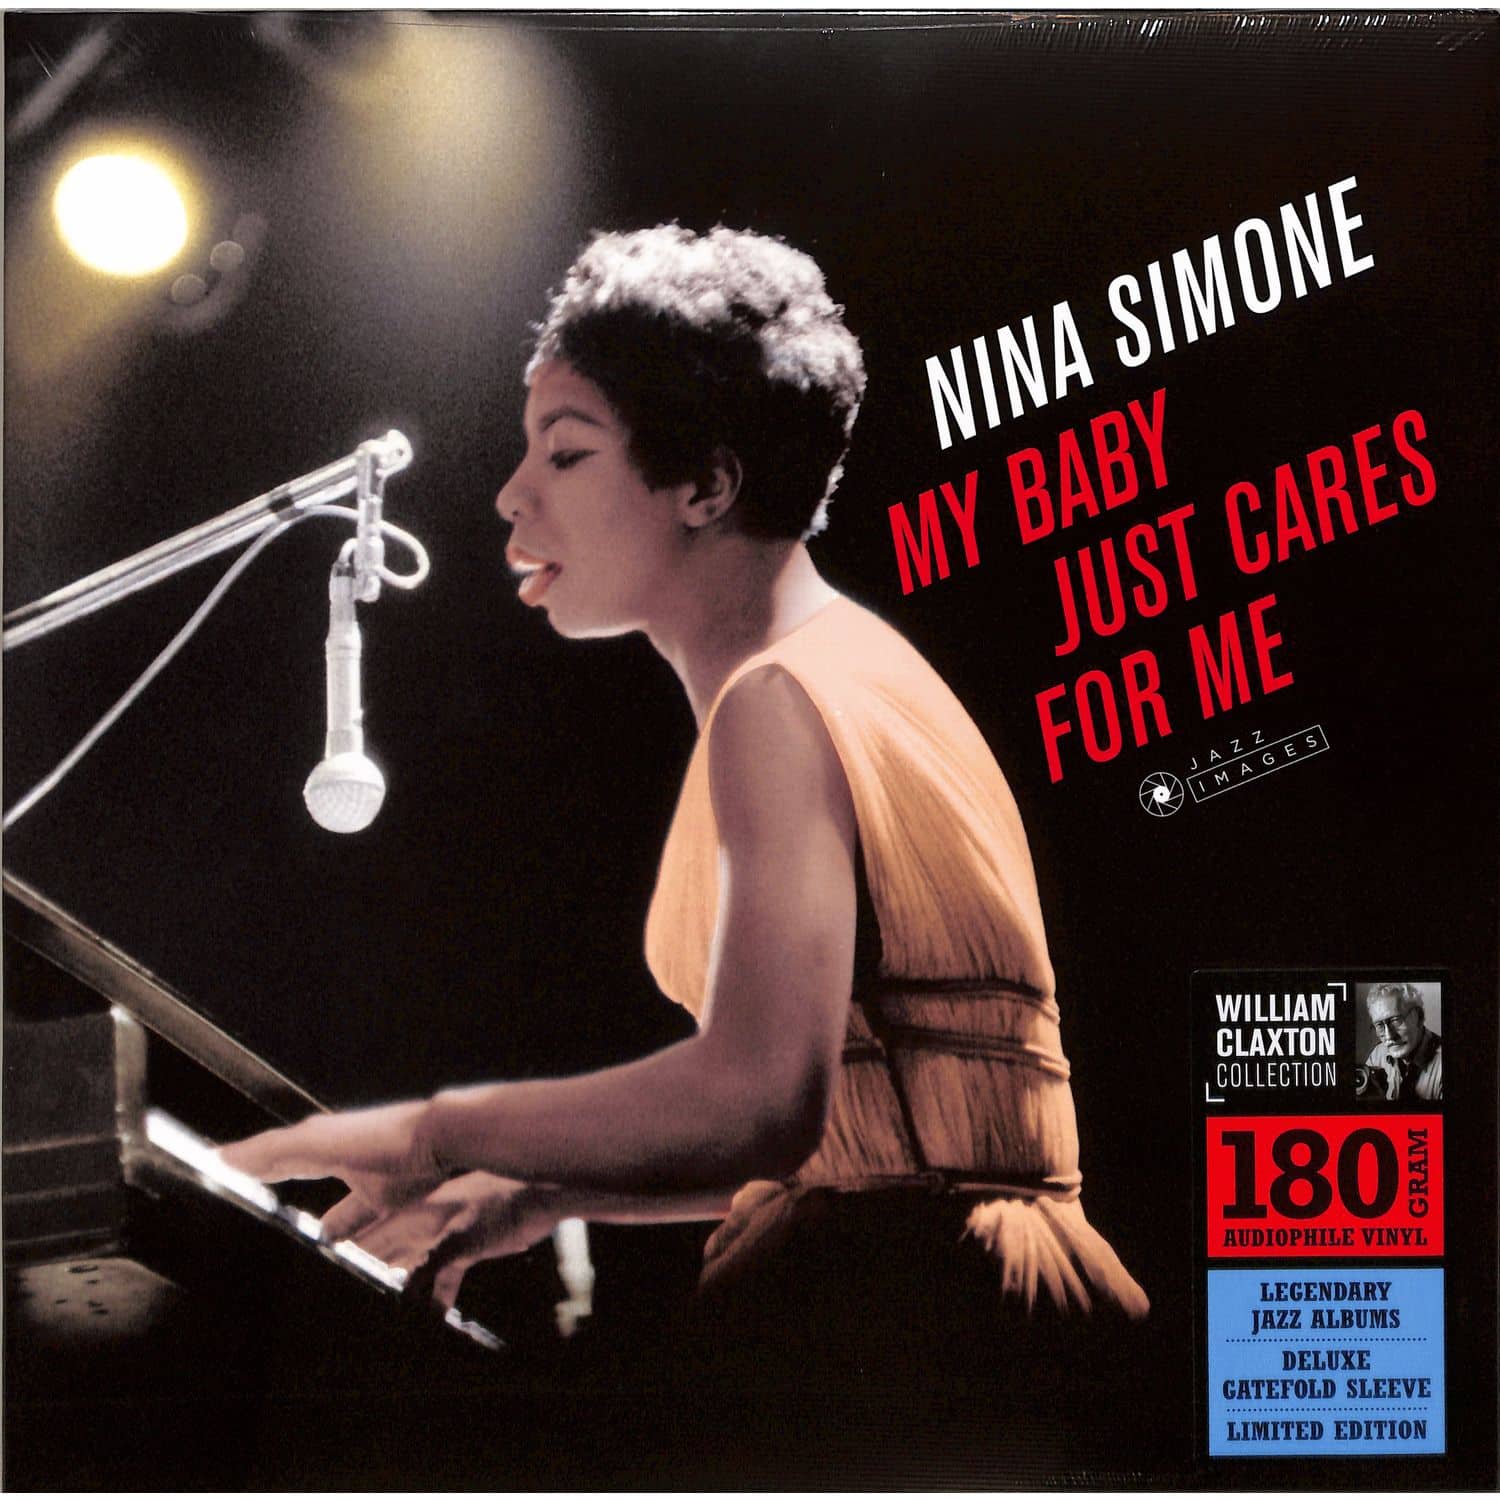 Nina Simone - MY BABY JUST CARES FOR ME 